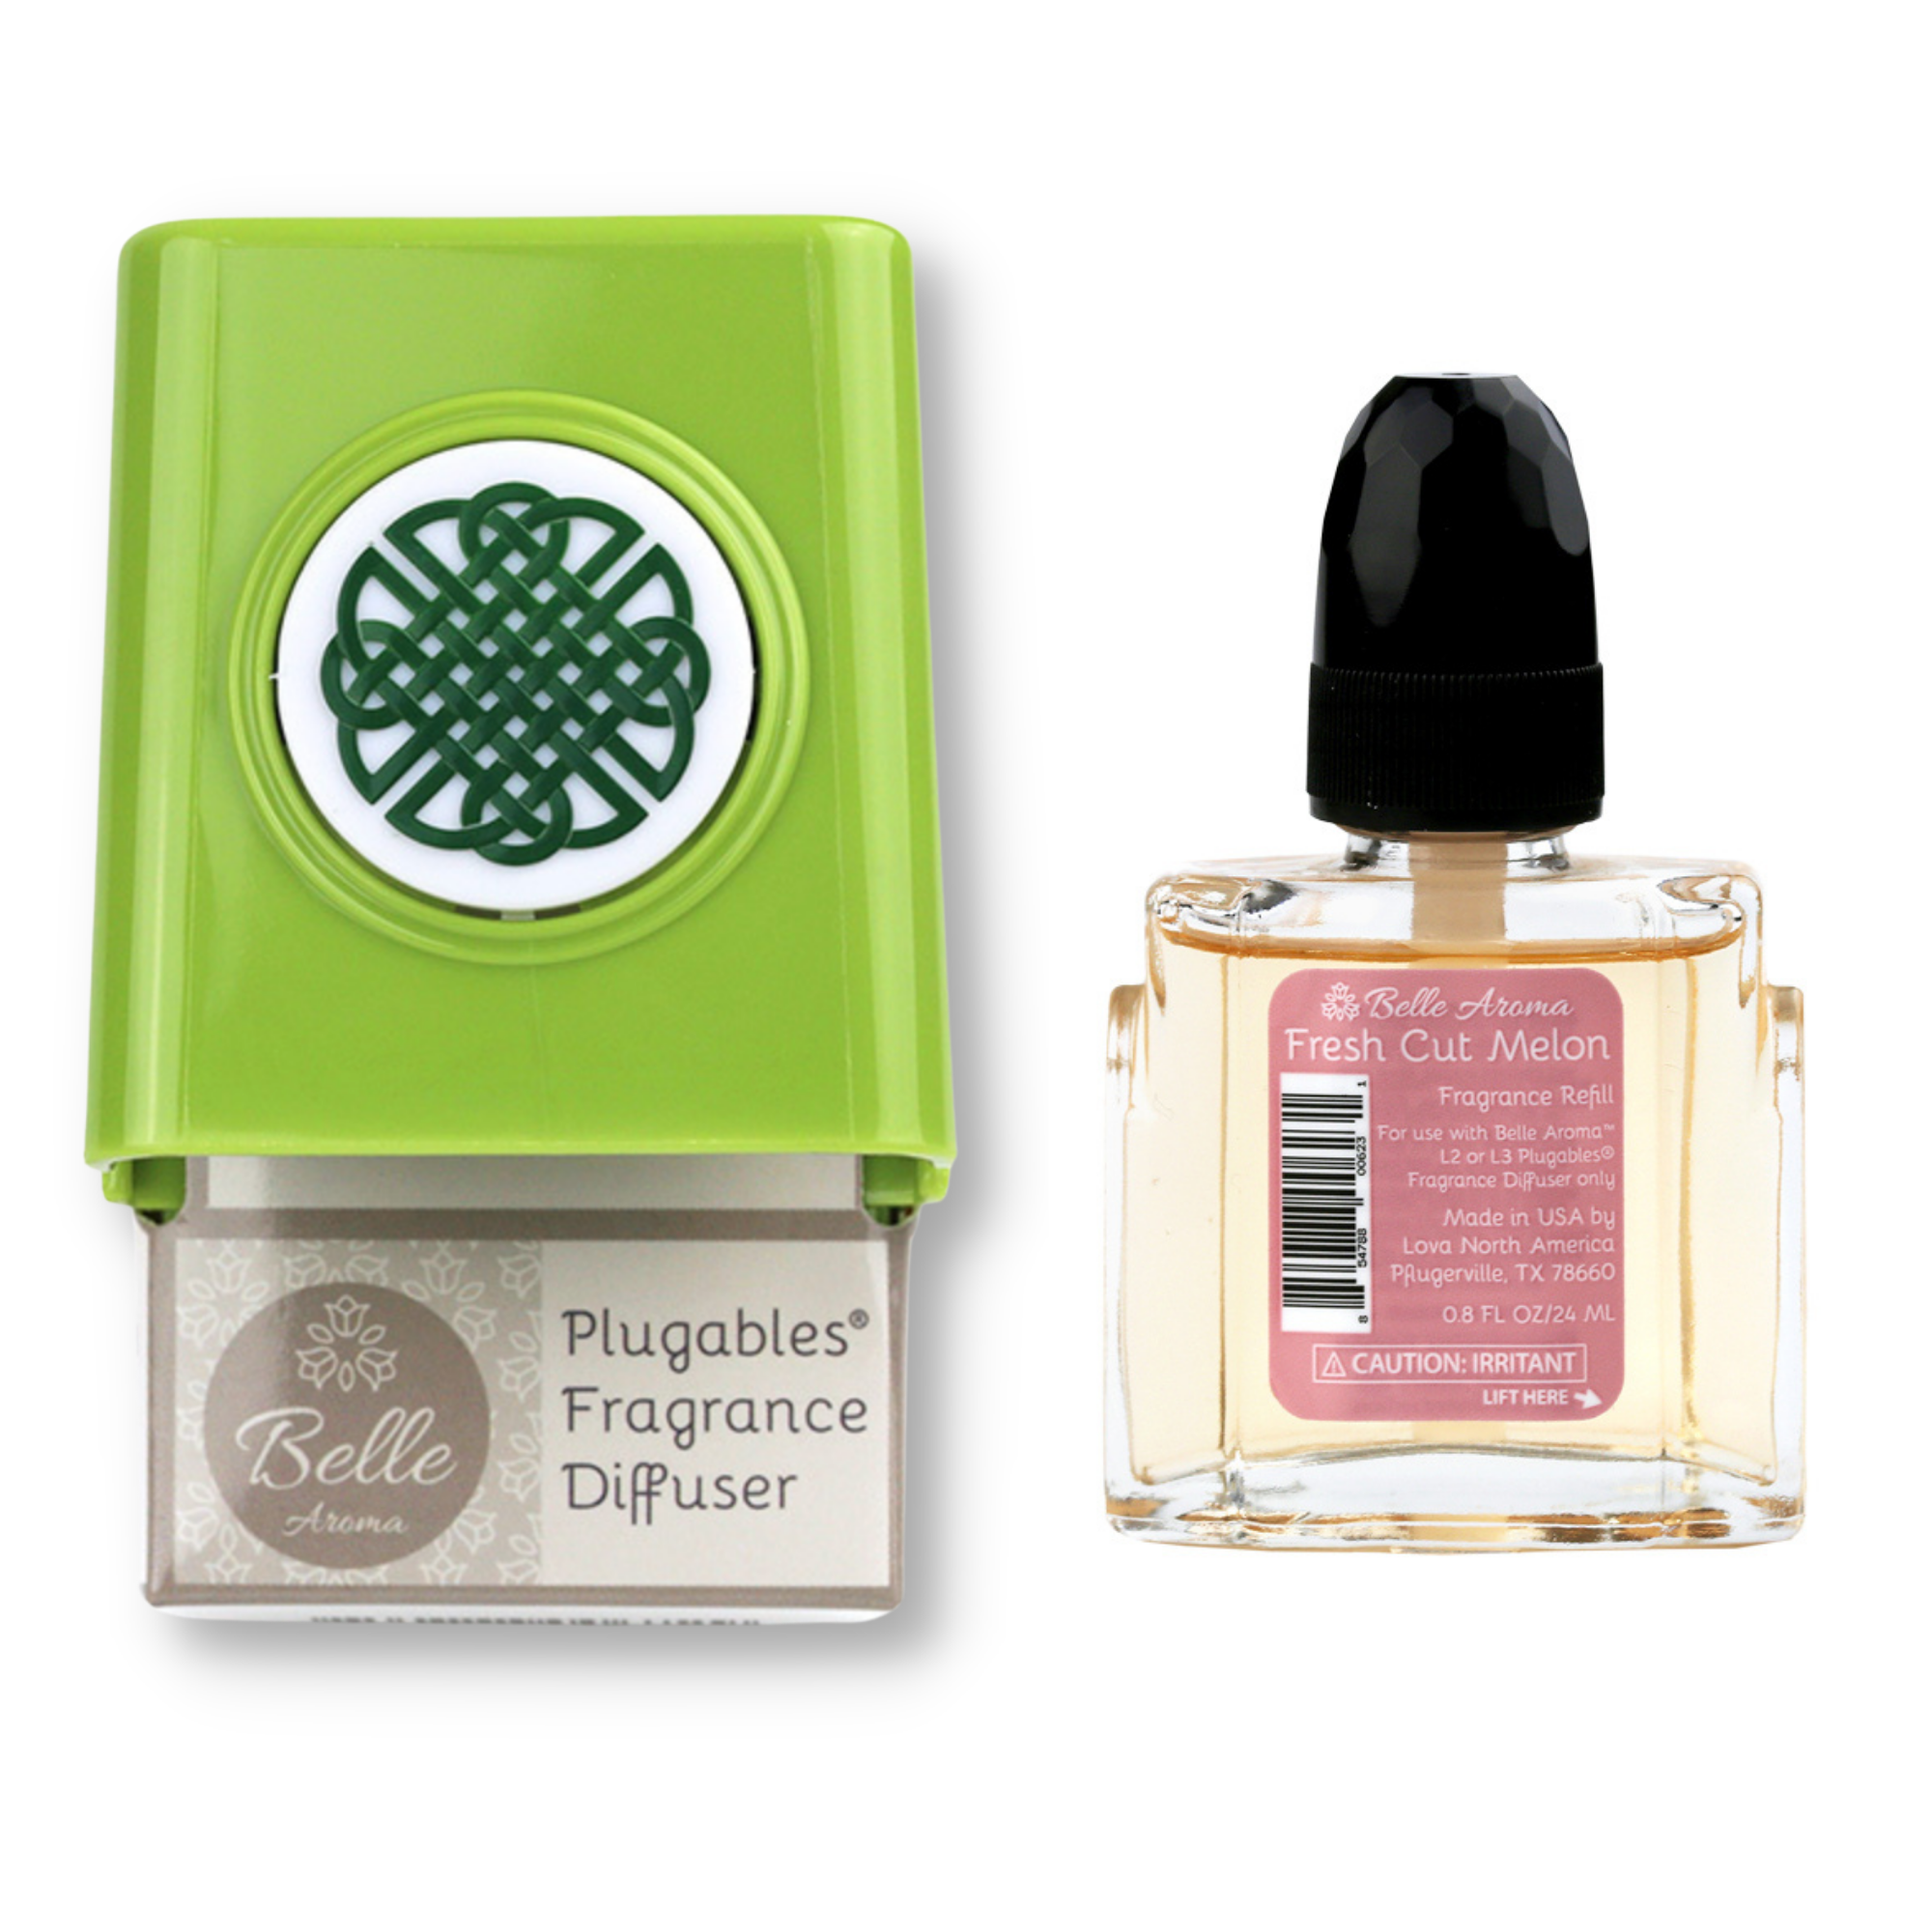 Celtic Knot Medallion Plugables® Plugin Aromalectric® Scented Oil Diffuser - Granny Smith with Fresh Cut Melon Fragrance Oil Home Fragrance Accessories